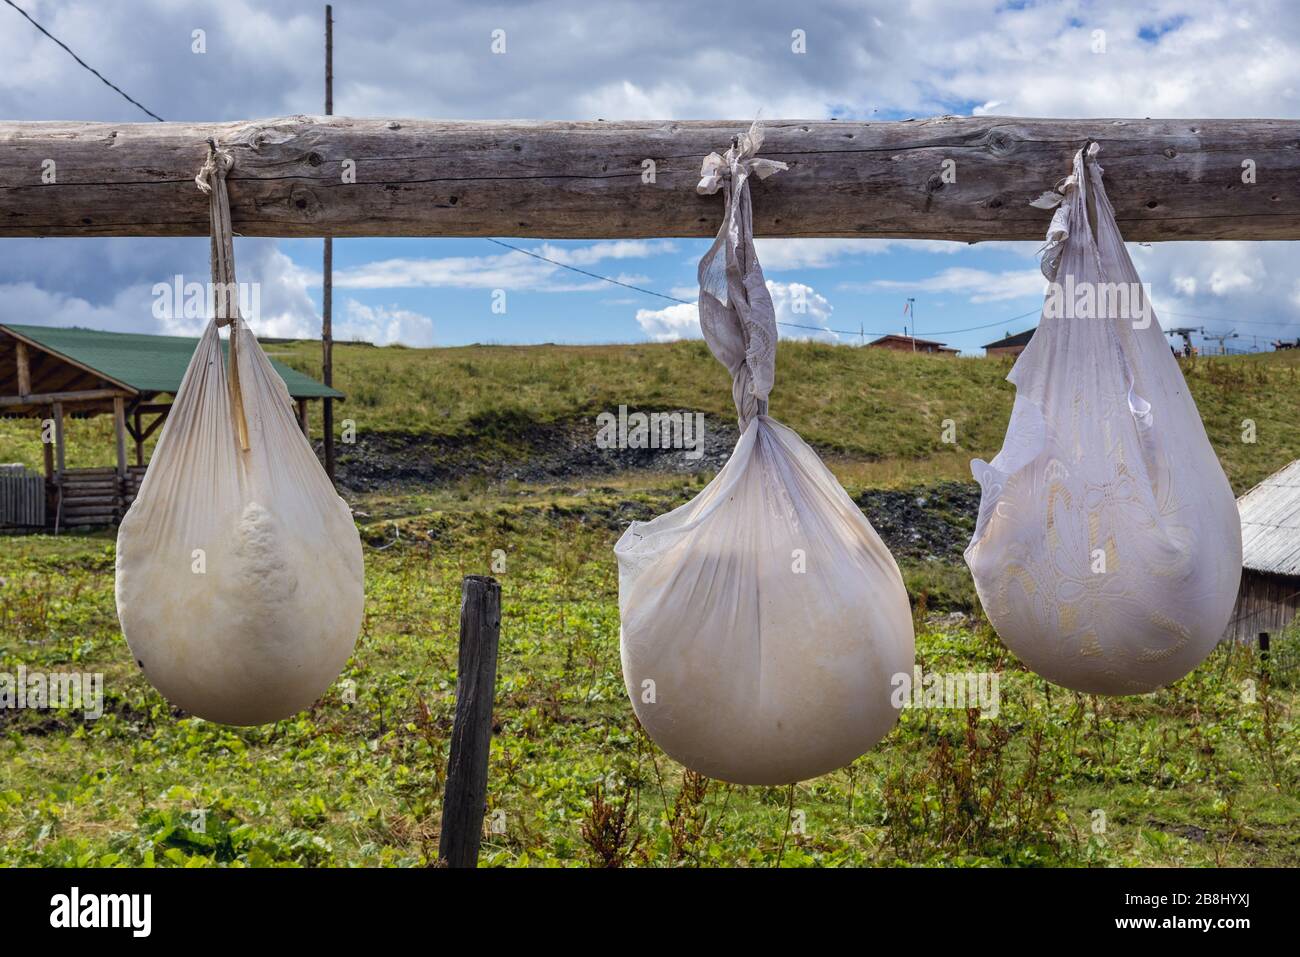 Traditional white fresh cheese made in small hut on a mountain in Borsa resort in Rodna Mountains, located in Maramures County of Northern Romania Stock Photo